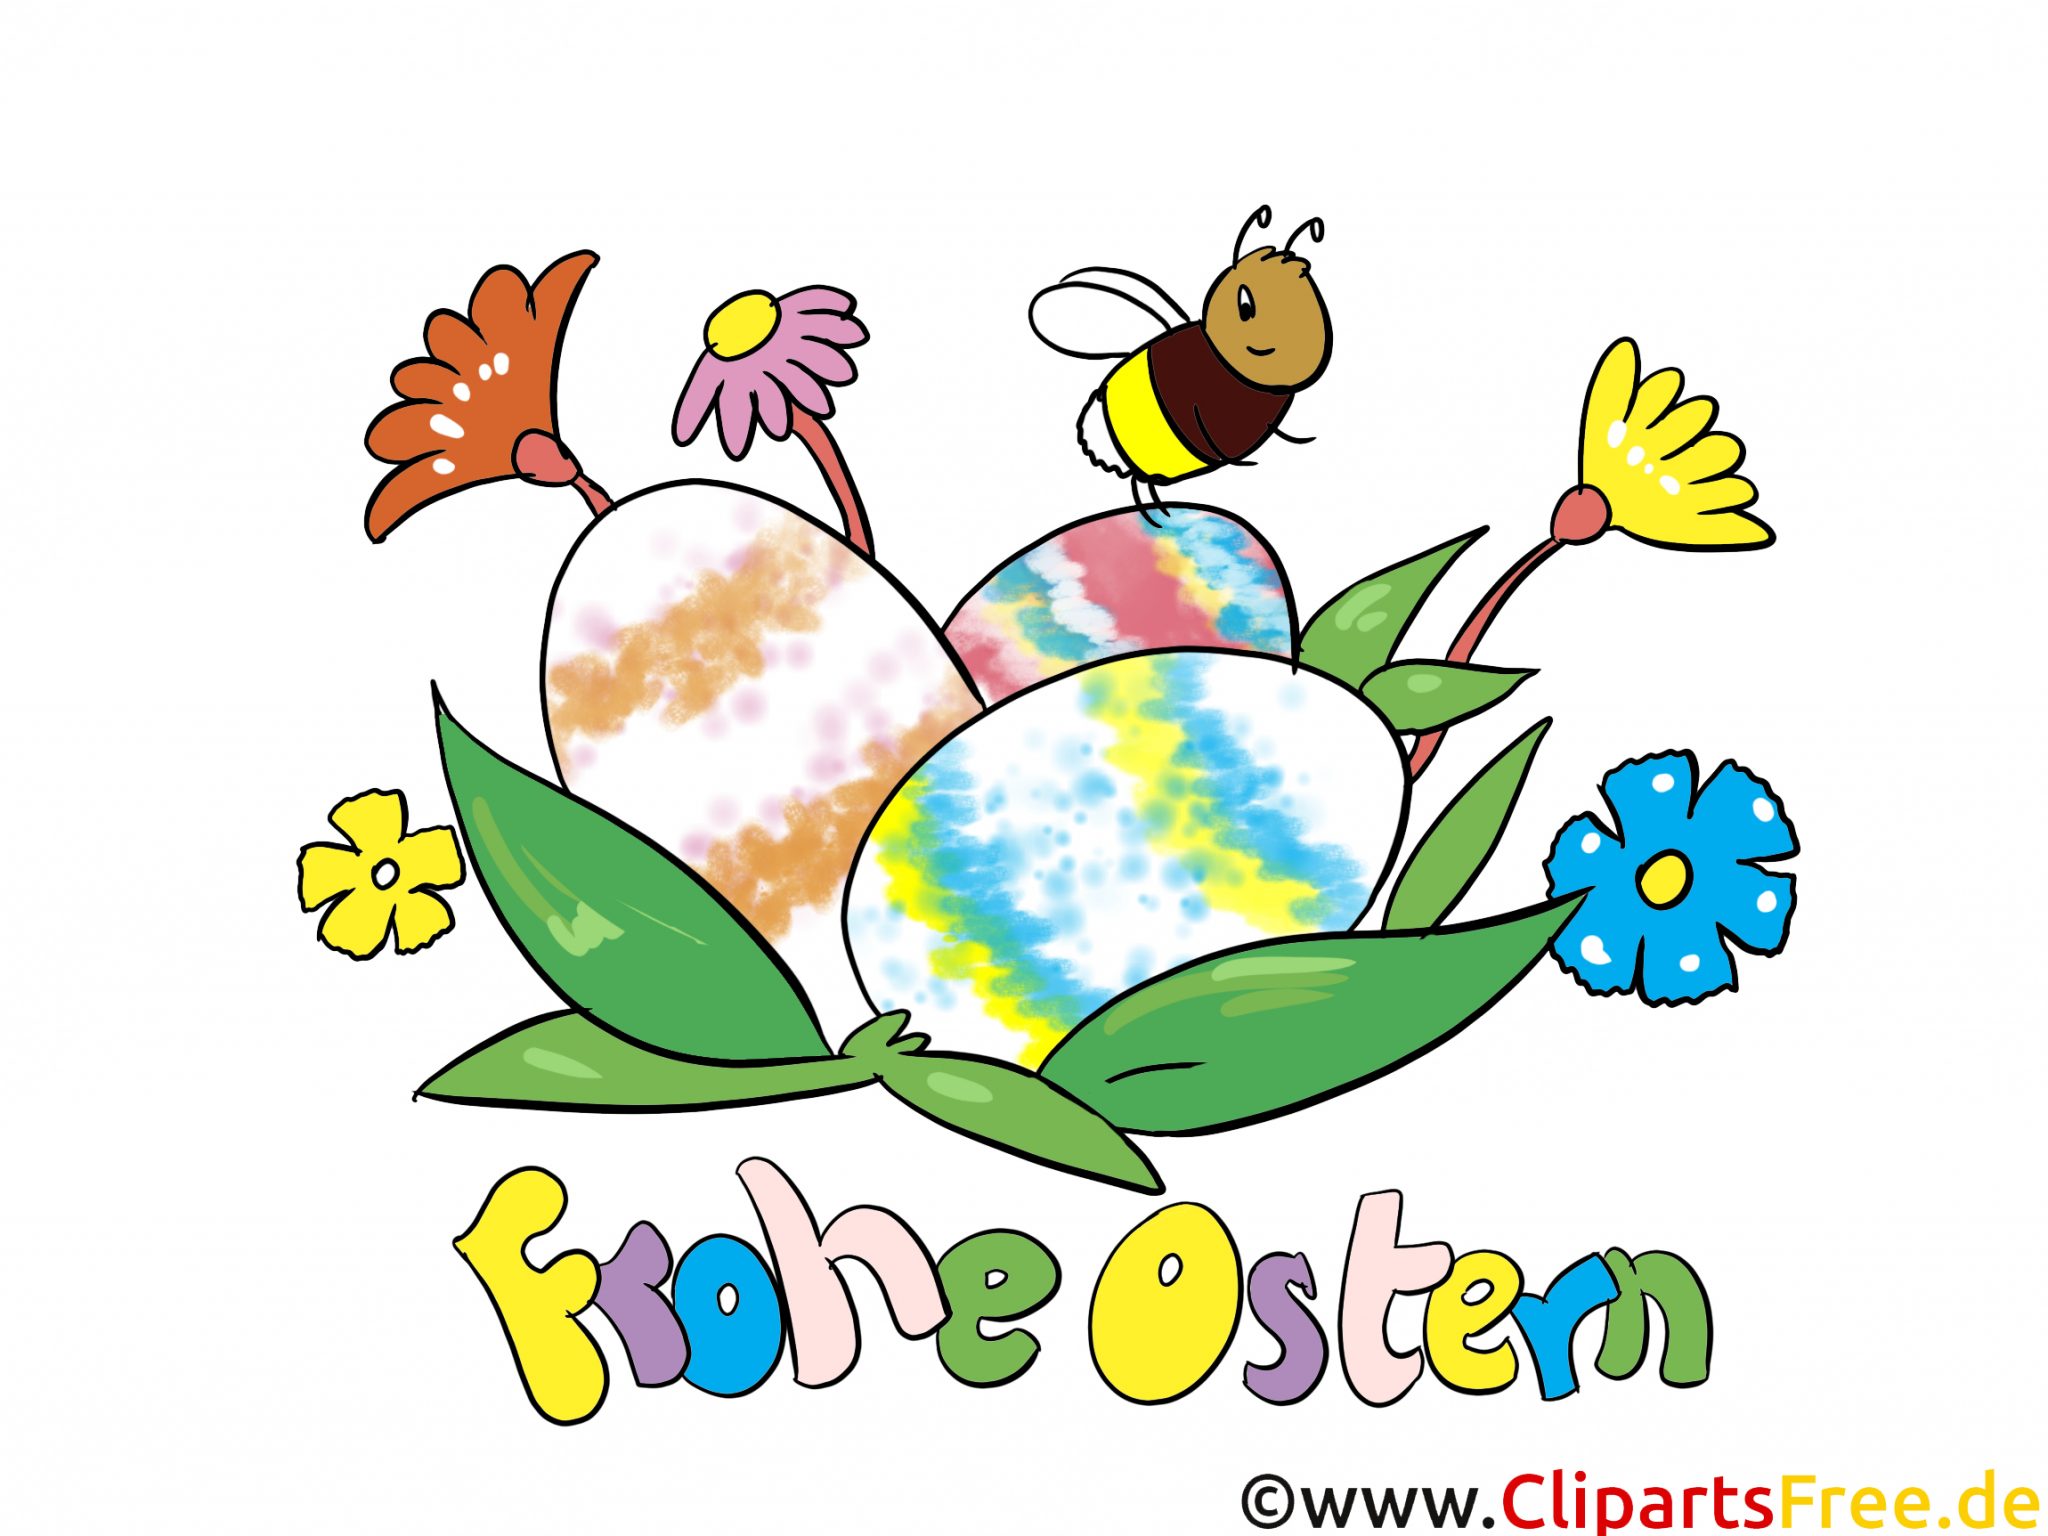 Frohe Ostern раскраска